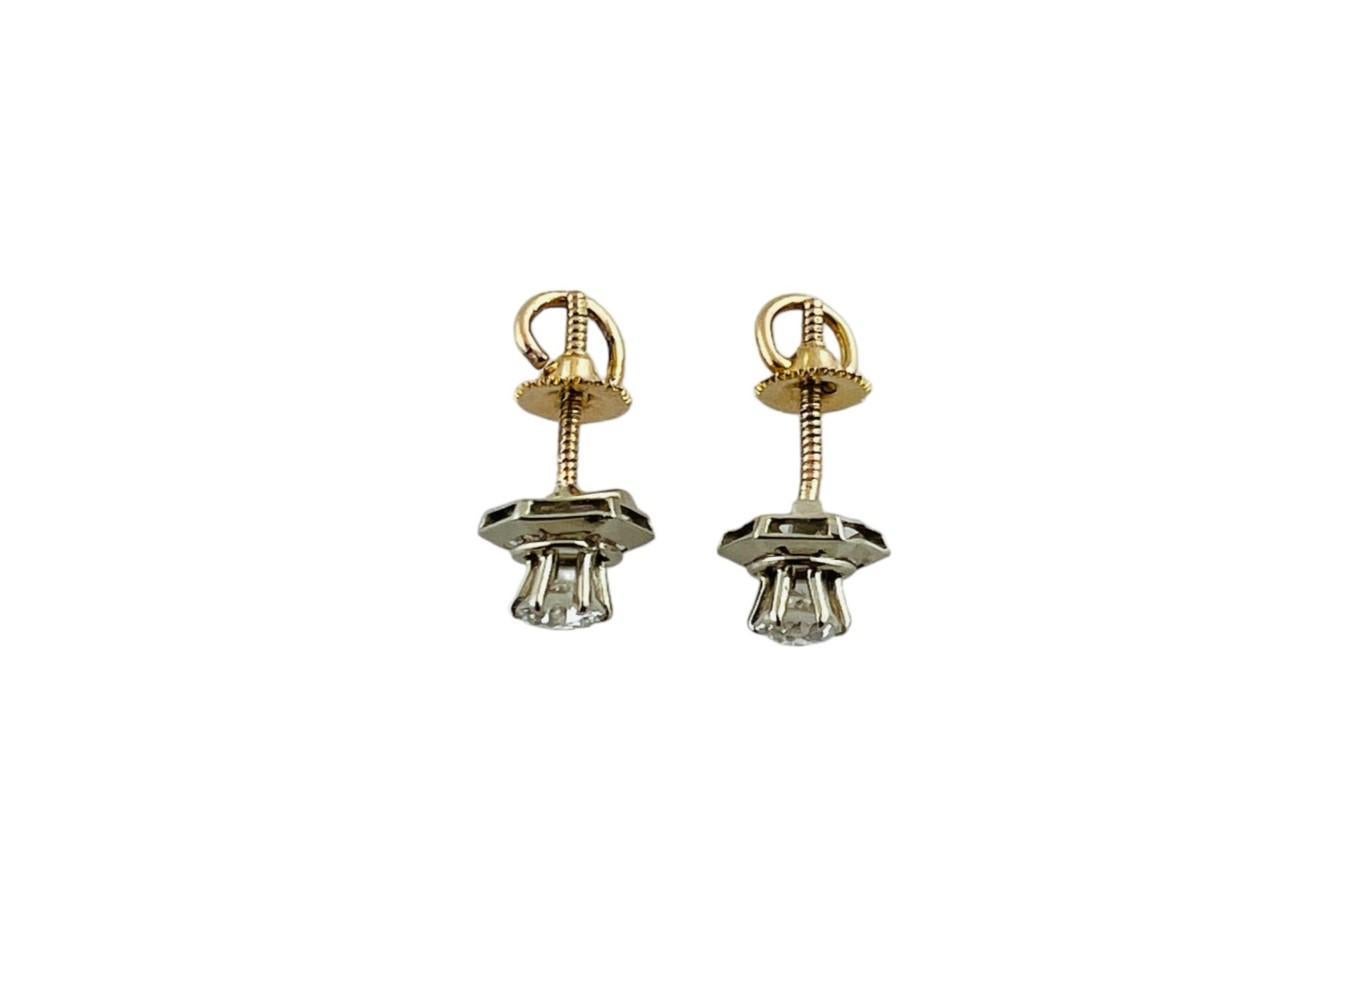 These vintage diamond stud earrings are each set with one round brilliant diamond.

Behind each diamond is a hexagon jacket of 14K white gold

Screw back posts. 14K yellow gold backs.

Diamonds are each approx. 0.25 carats - approx. .50 cts total